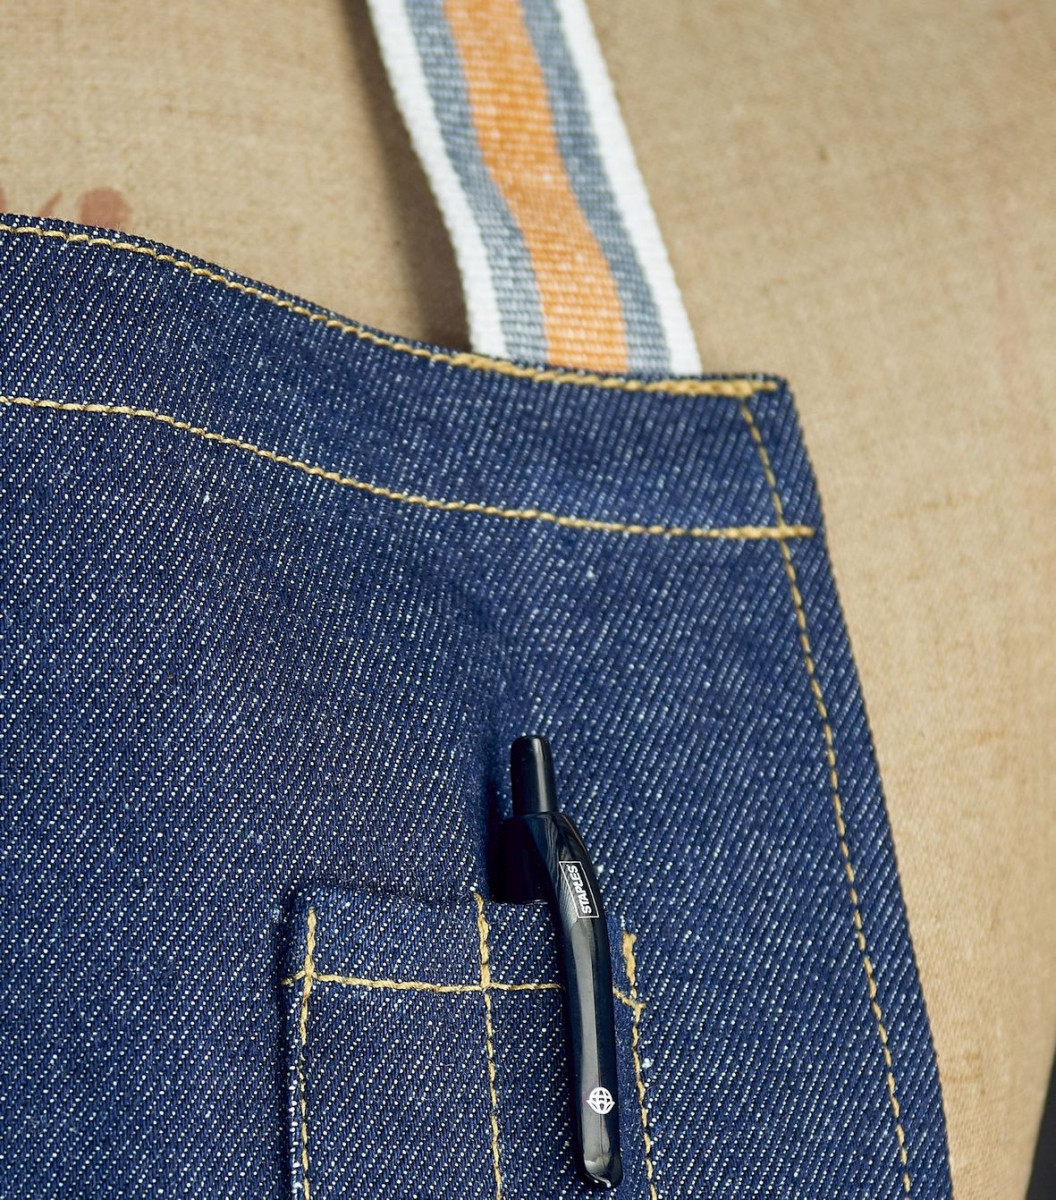 denim apron with pen pockets and stripes straps - Made in Britai